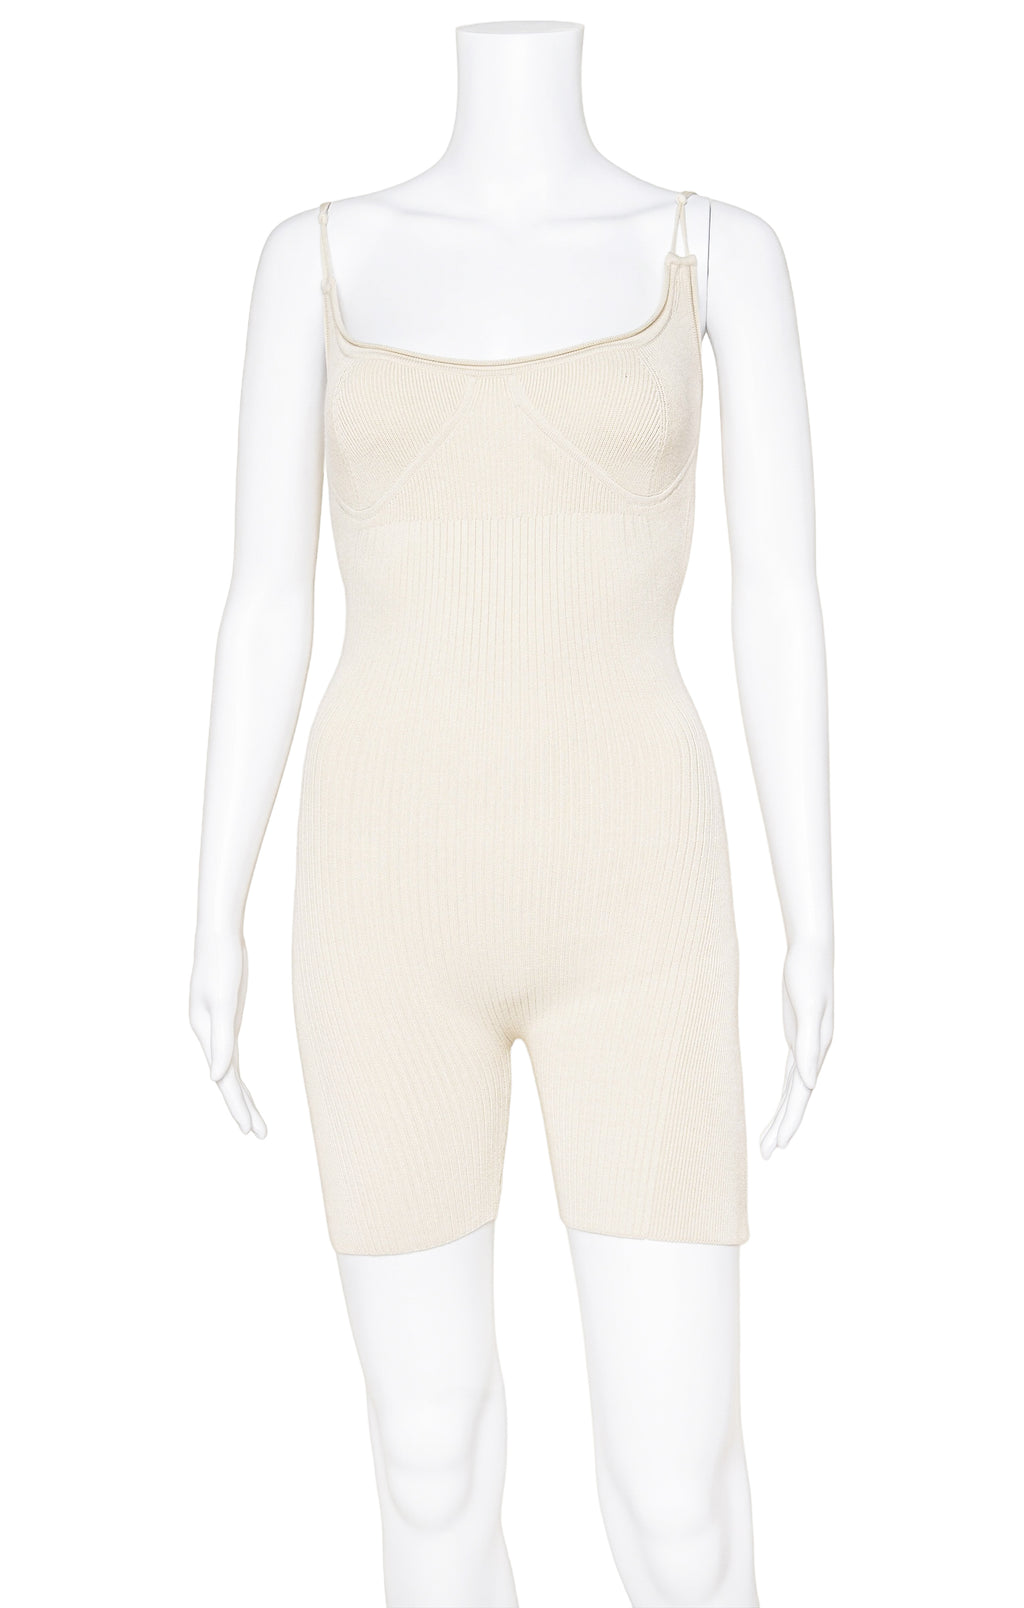 JACQUEMUS Romper Size: FR 36 / Comparable to US 2-4